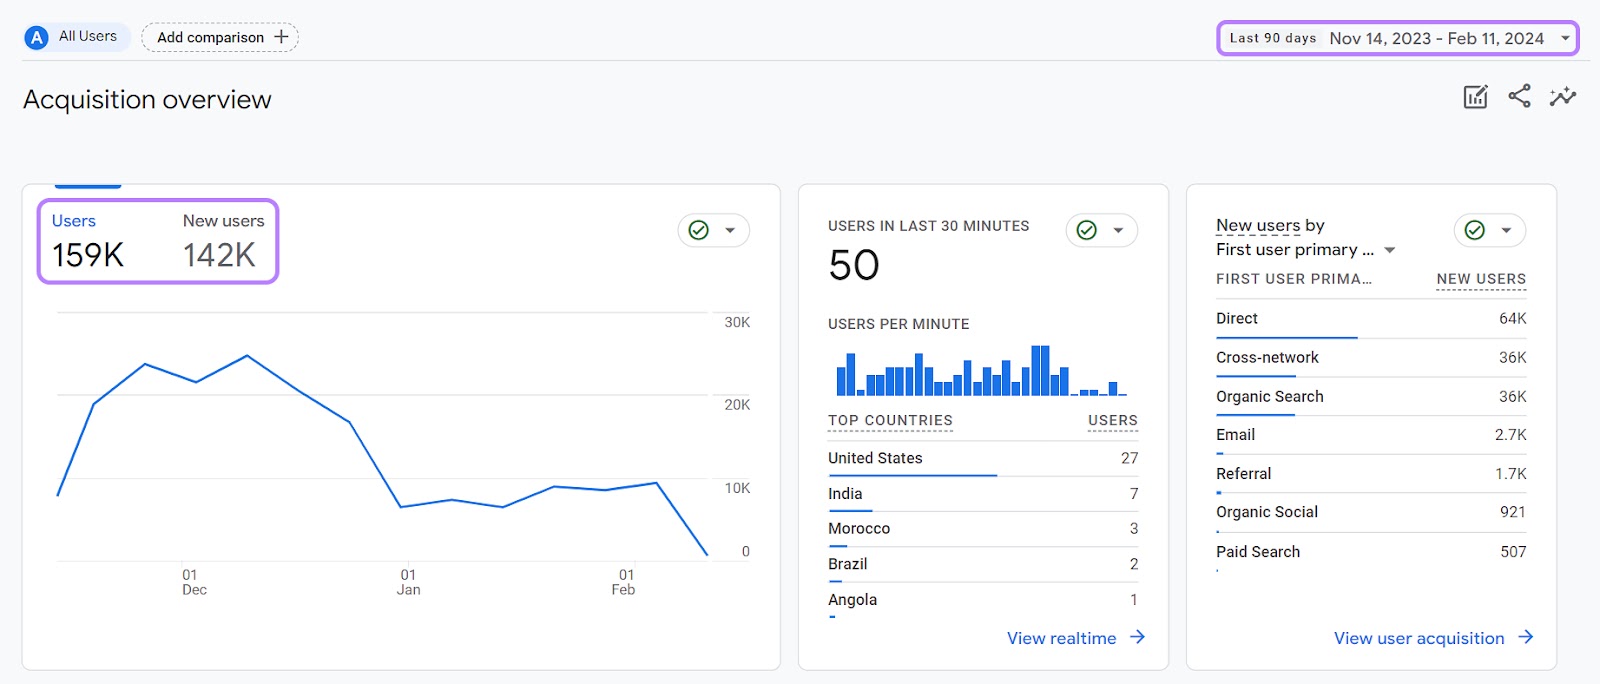 Acquisition overview report in Google Analytics 4, showing users and new users